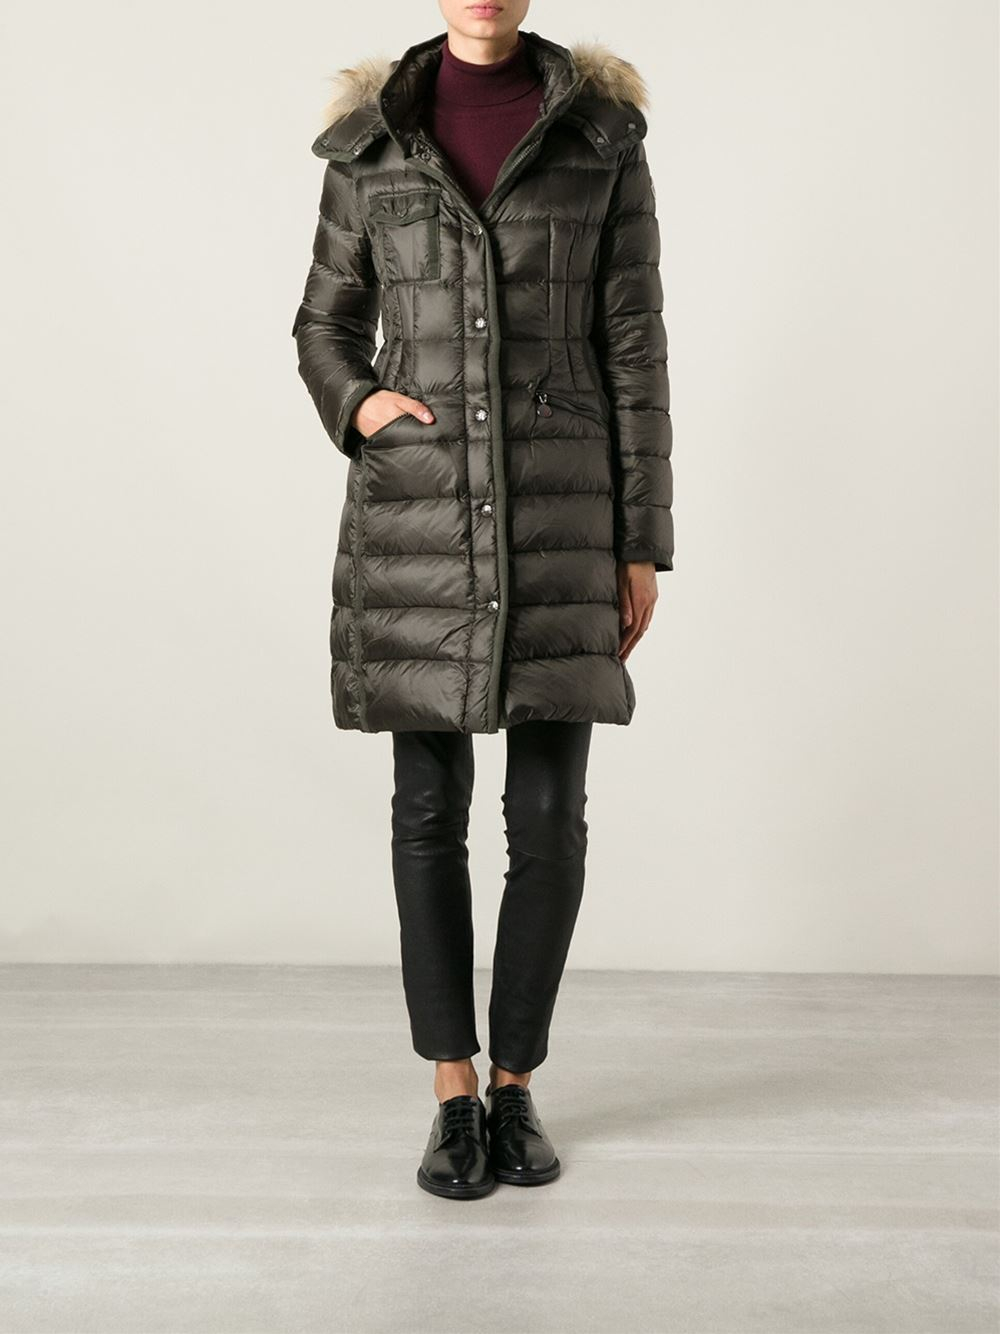 Moncler 'Hermifur' Padded Coat in Green - Lyst